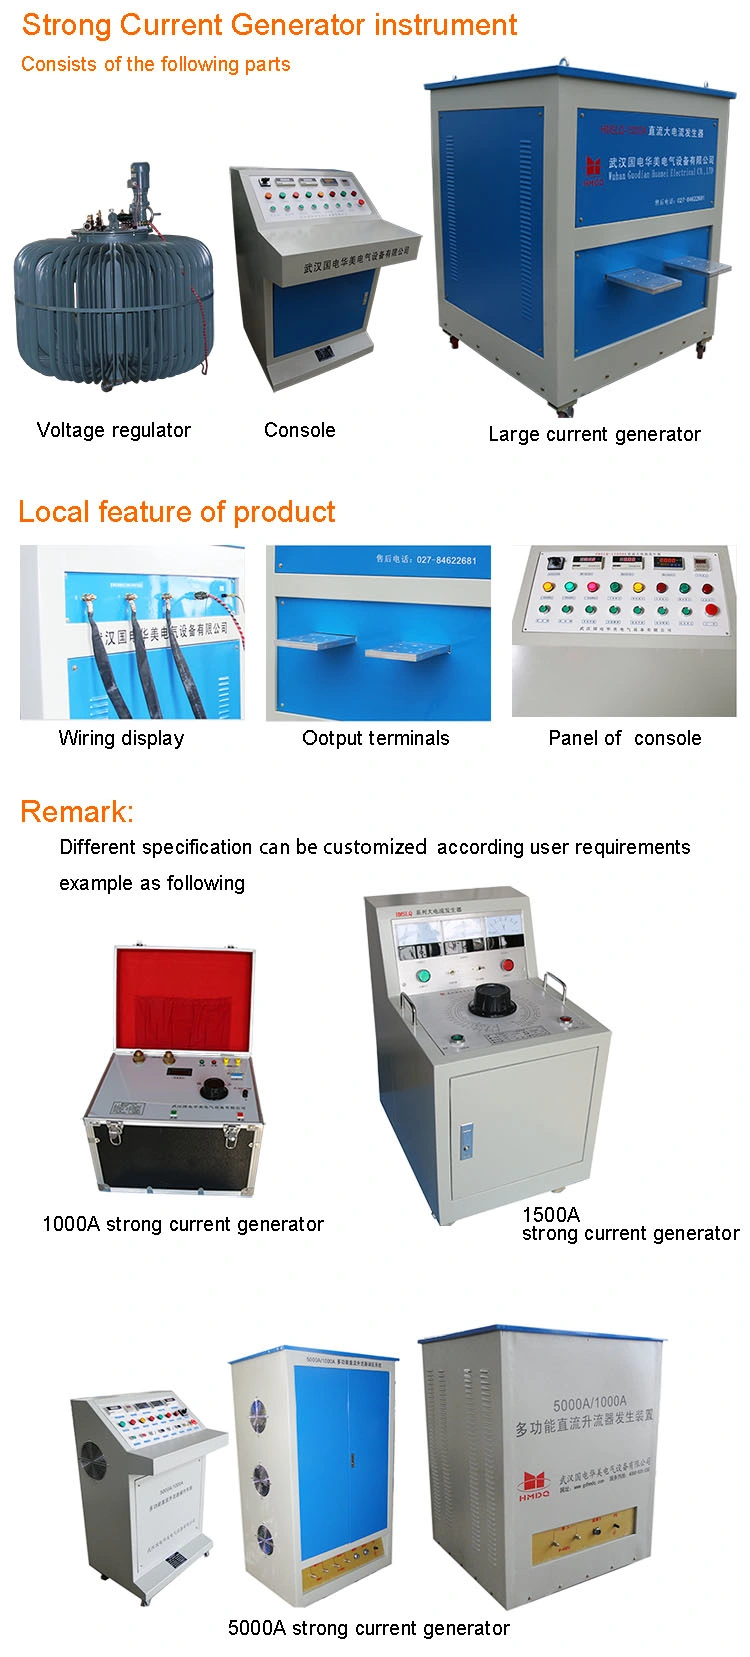 Primary Current Injection Test Procedure of Circuit Breakers